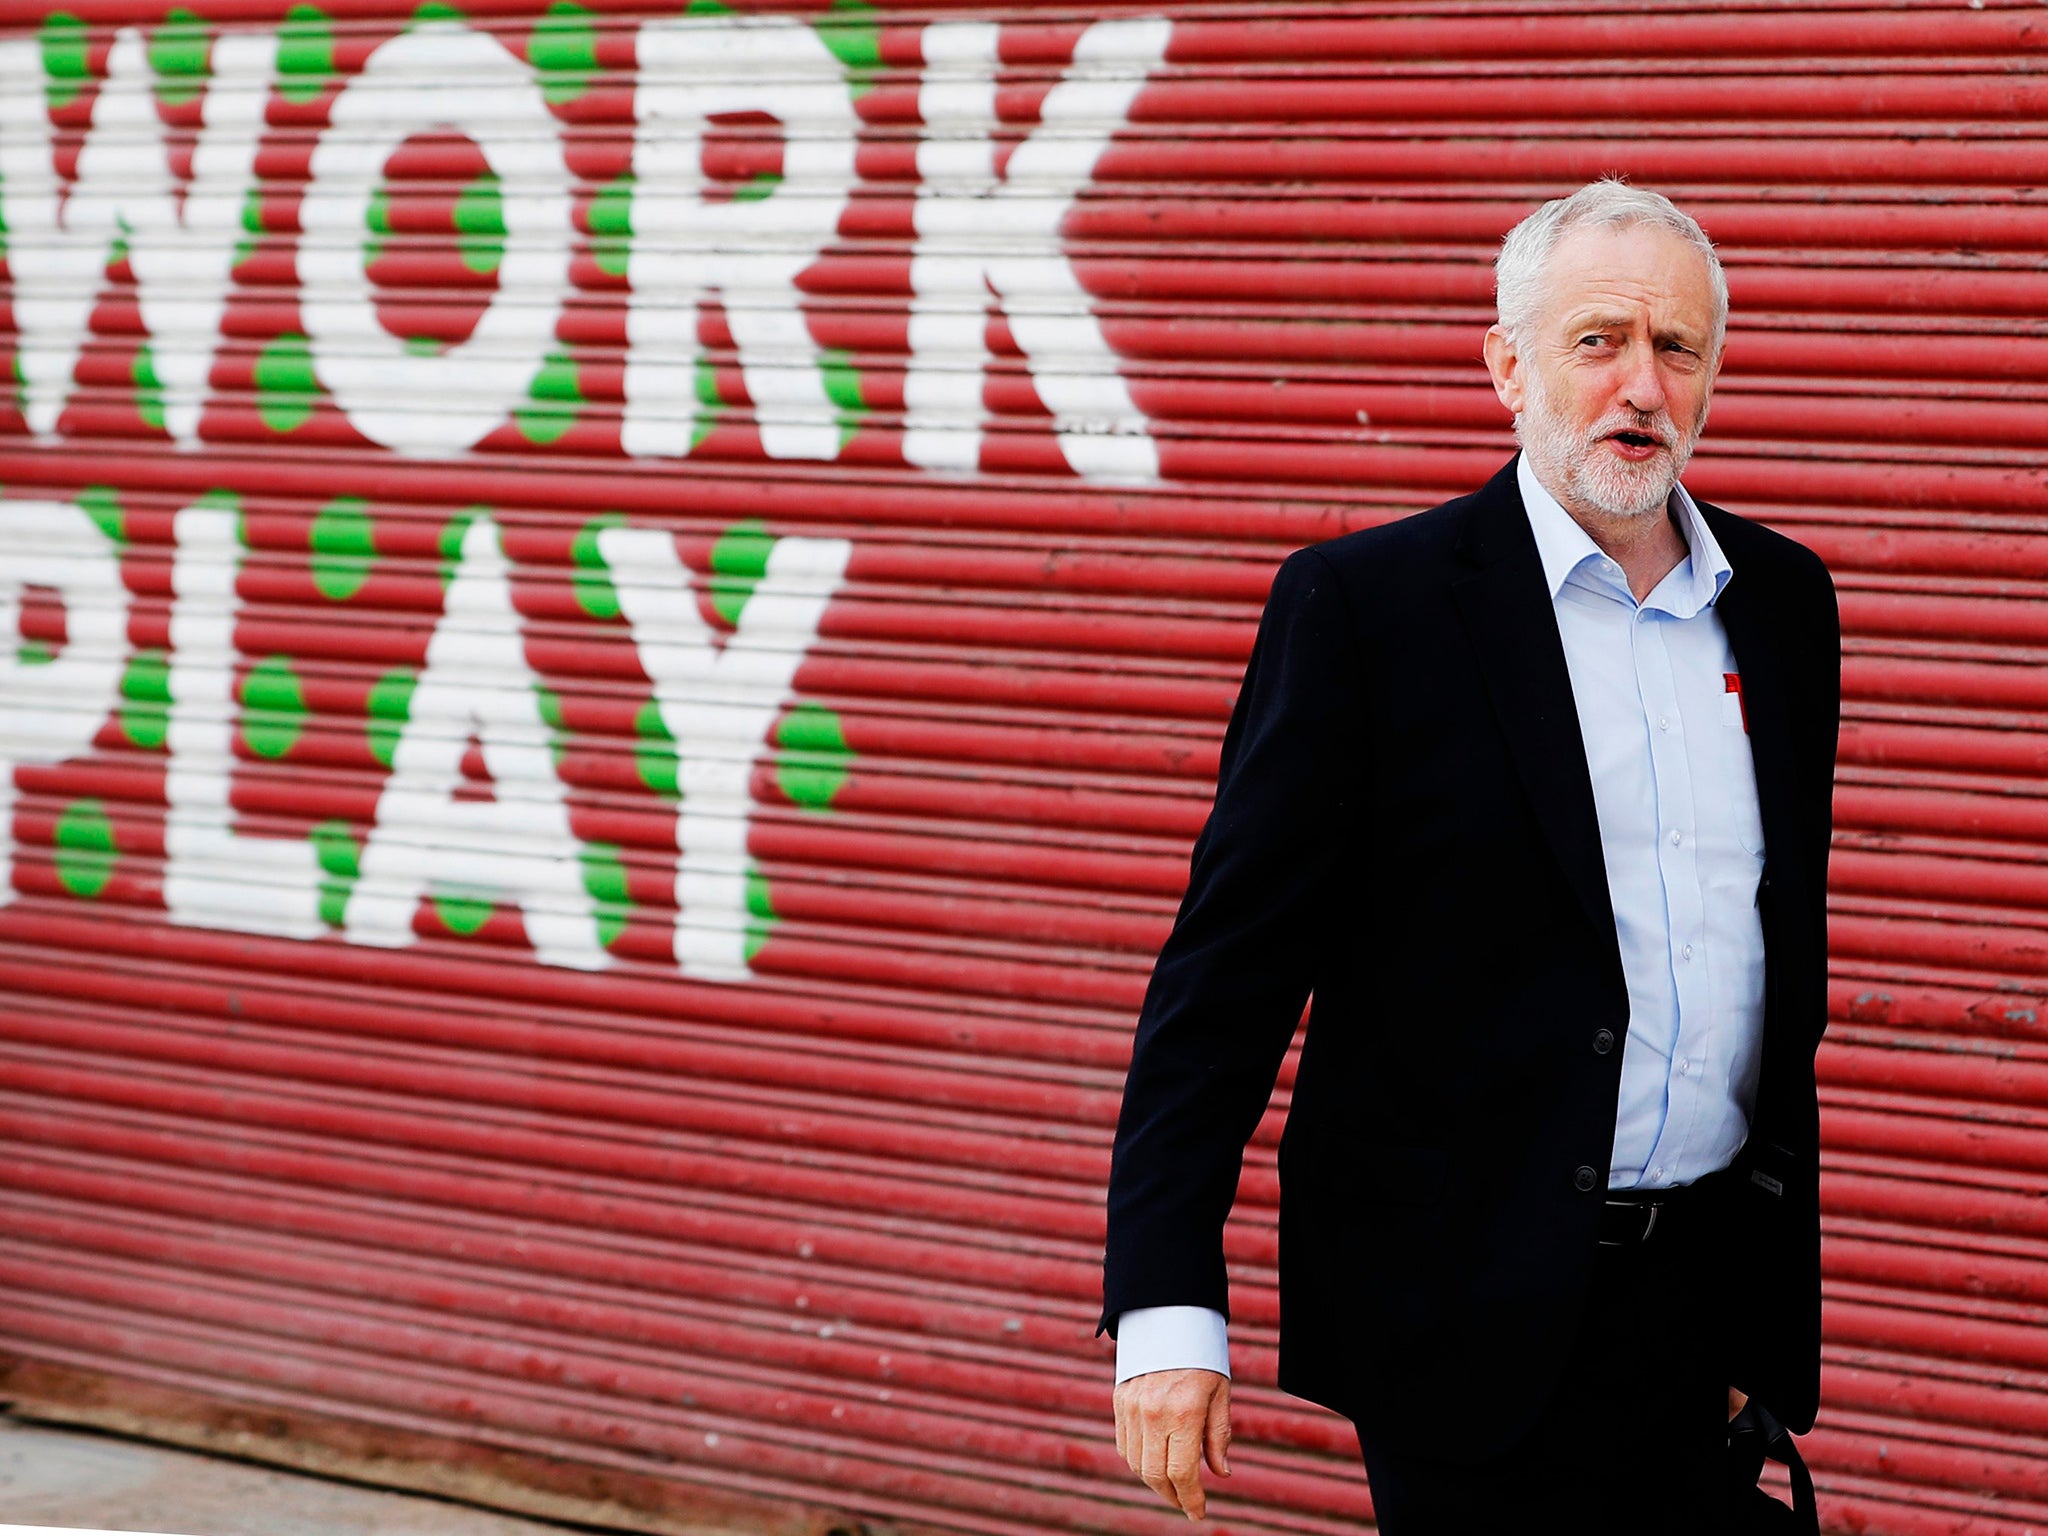 Jeremy Corbyn could reintroduce Tier 3 visas for foreign workers